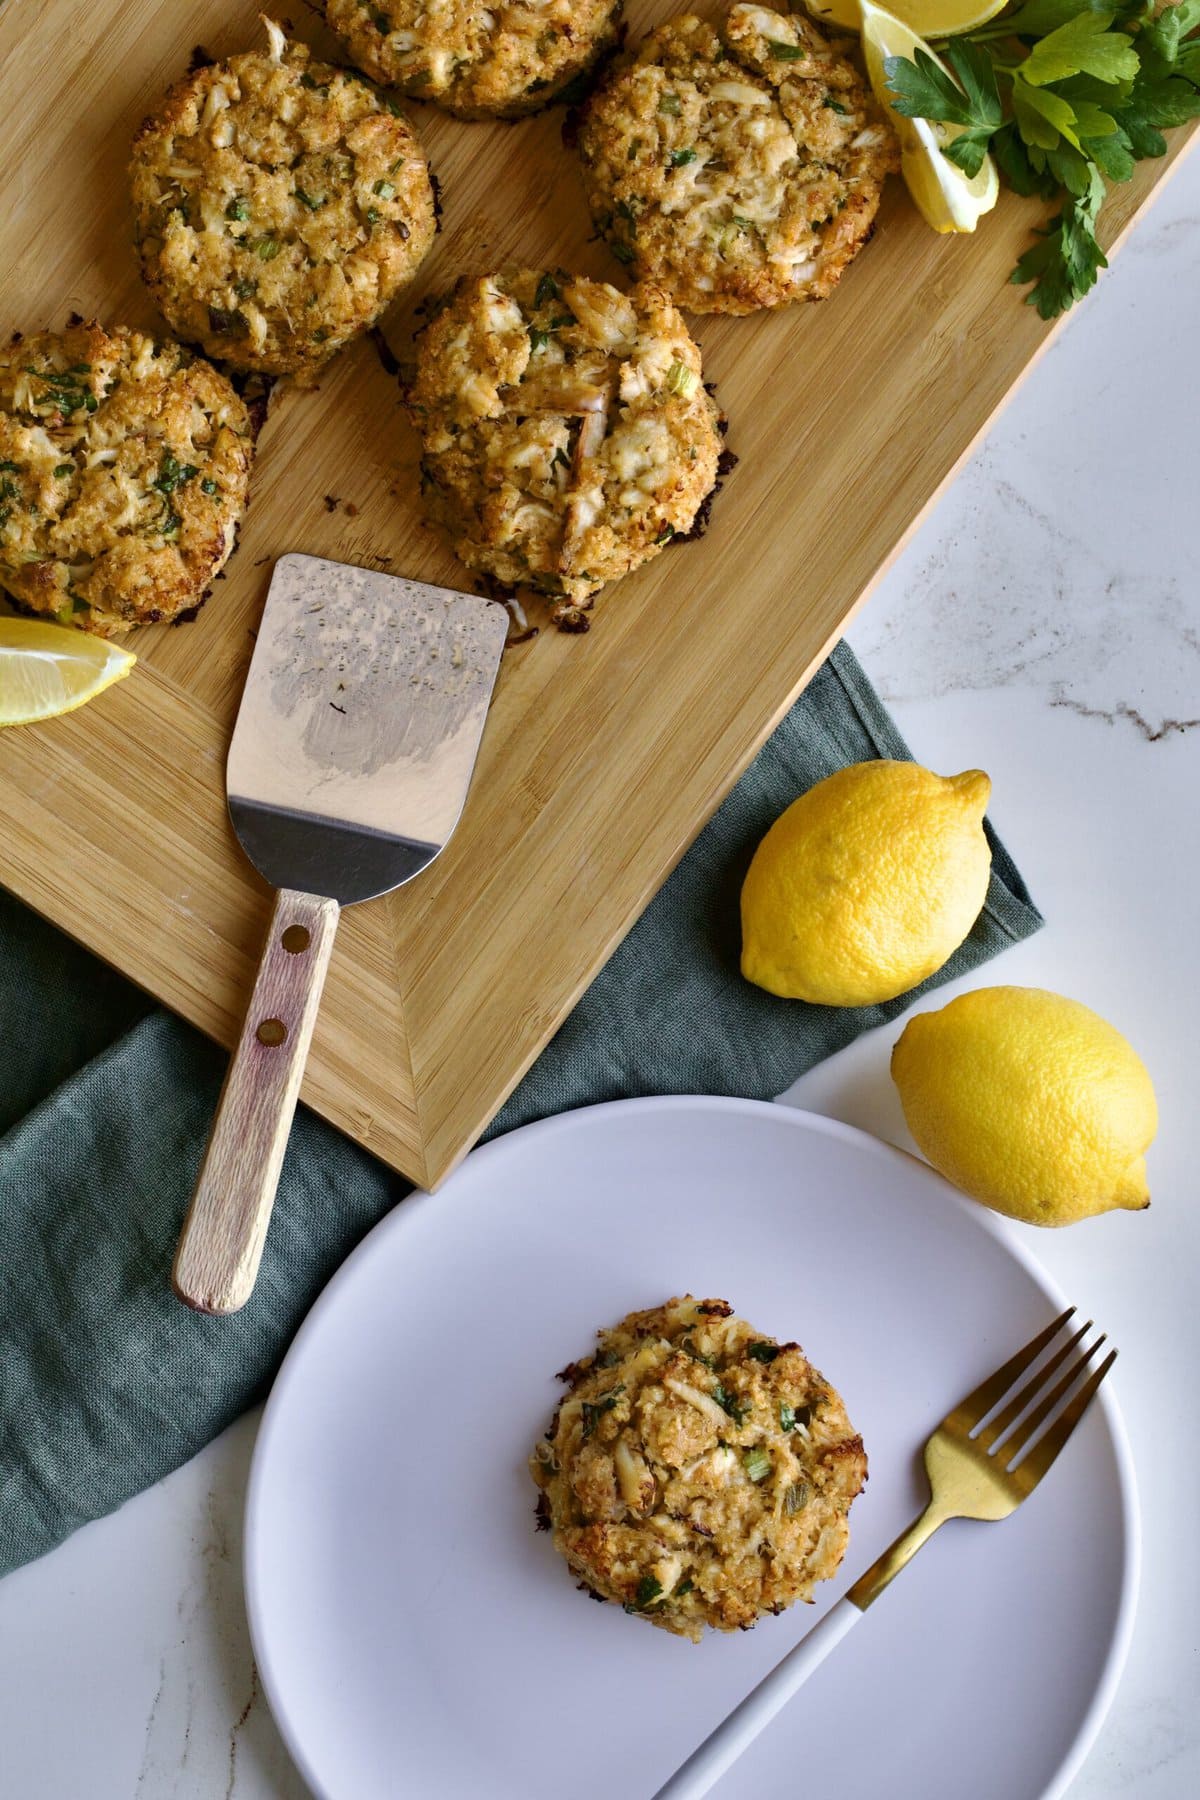 crab cakes displayed on wooden board with lemon and parsley. one crab cake on a white plate.